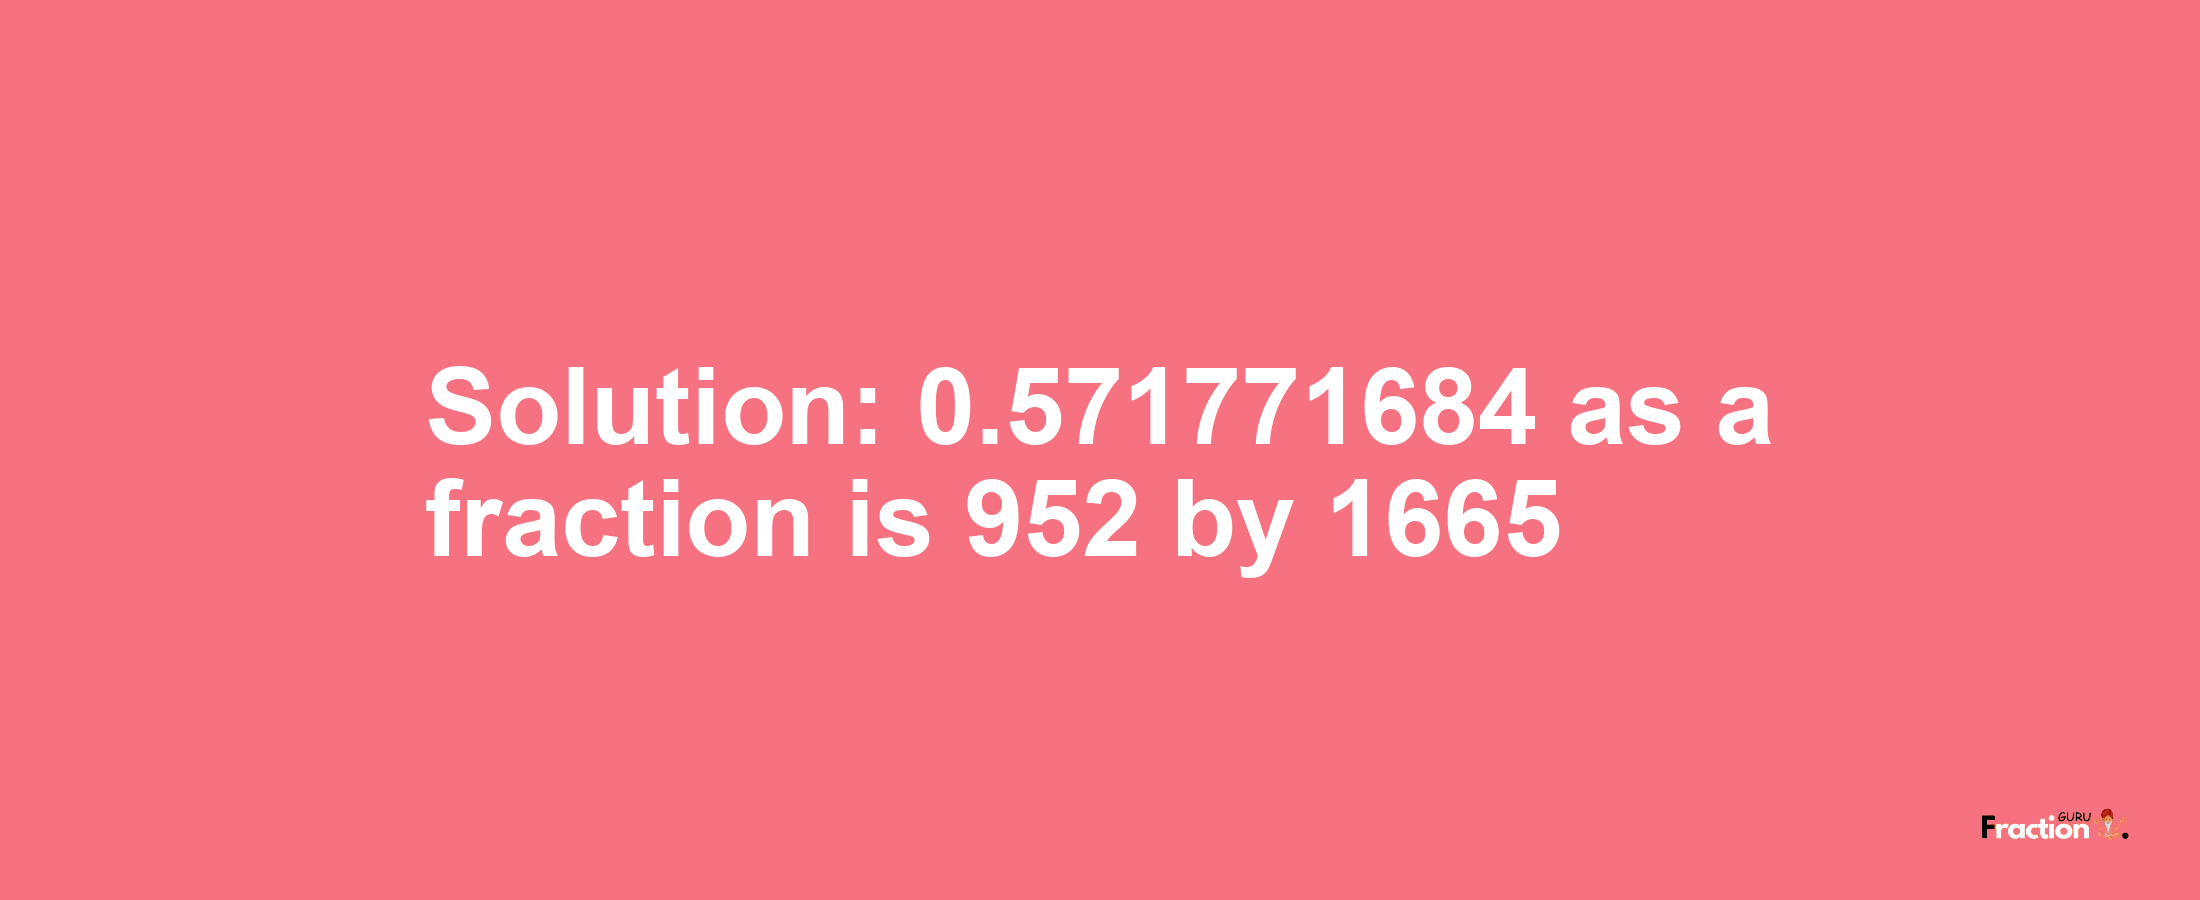 Solution:0.571771684 as a fraction is 952/1665